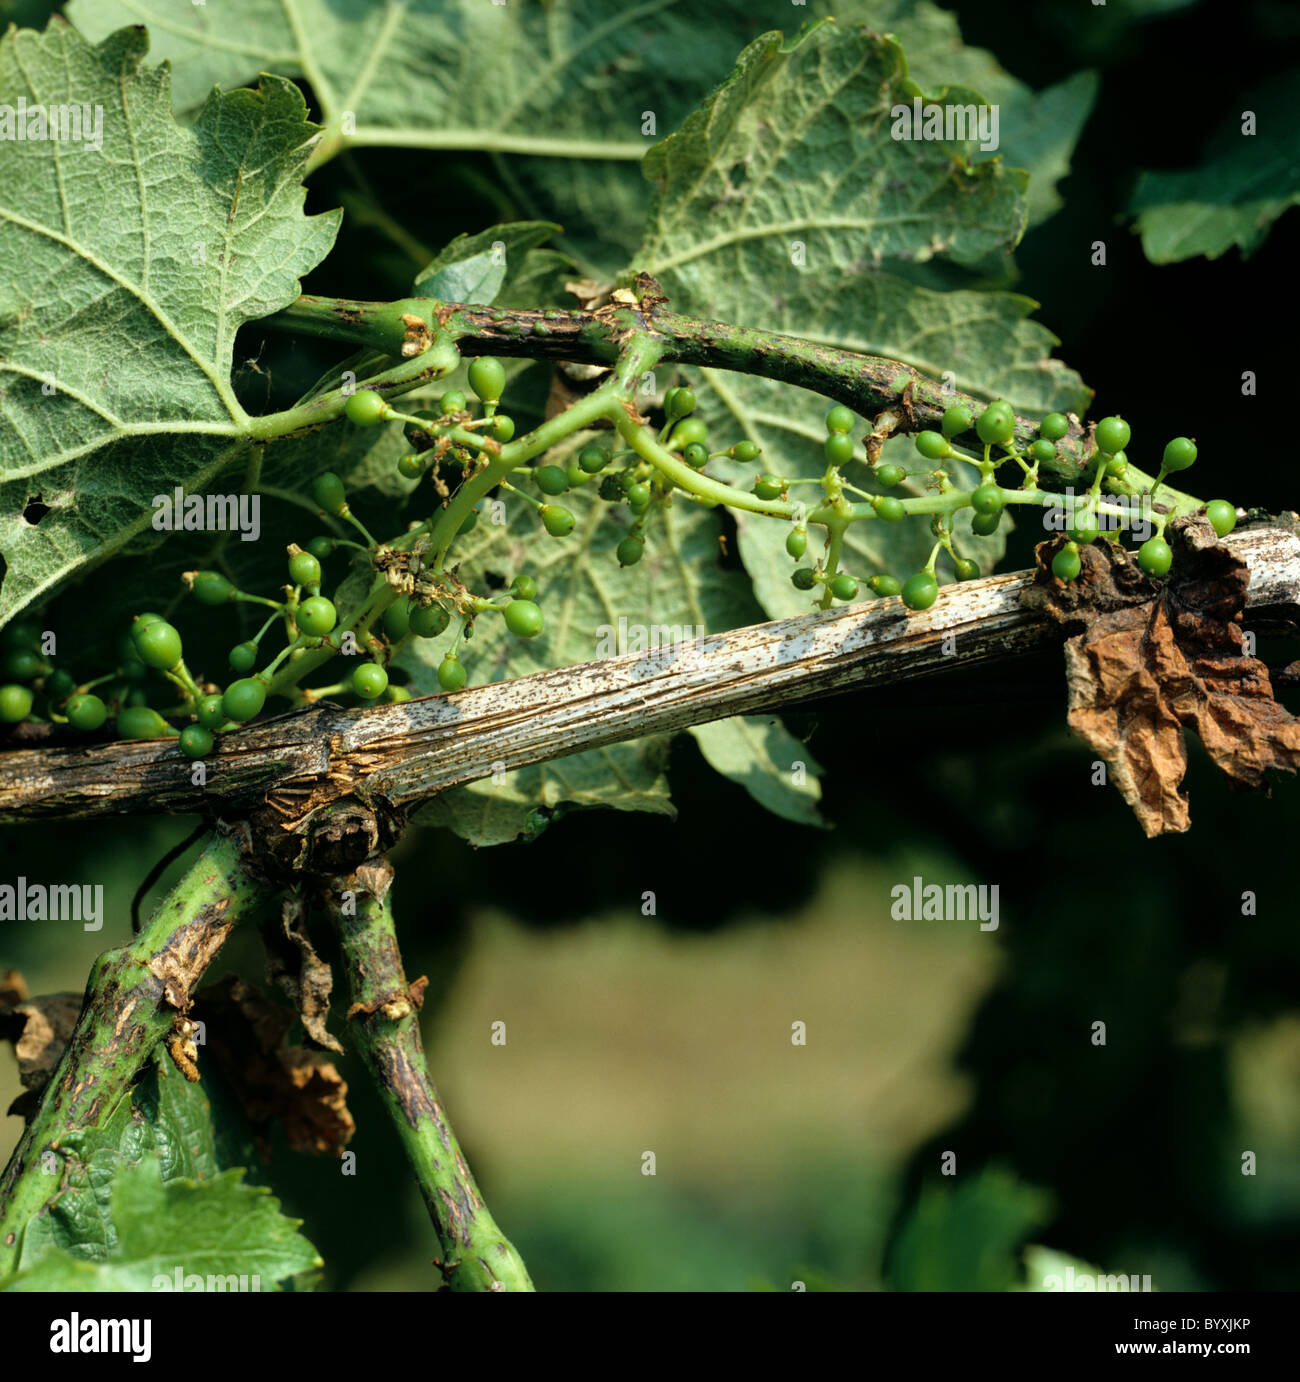 Dead-arm or excoriose (Phomopsis viticola) lesions on new growth and pyncnidia on old stem Stock Photo